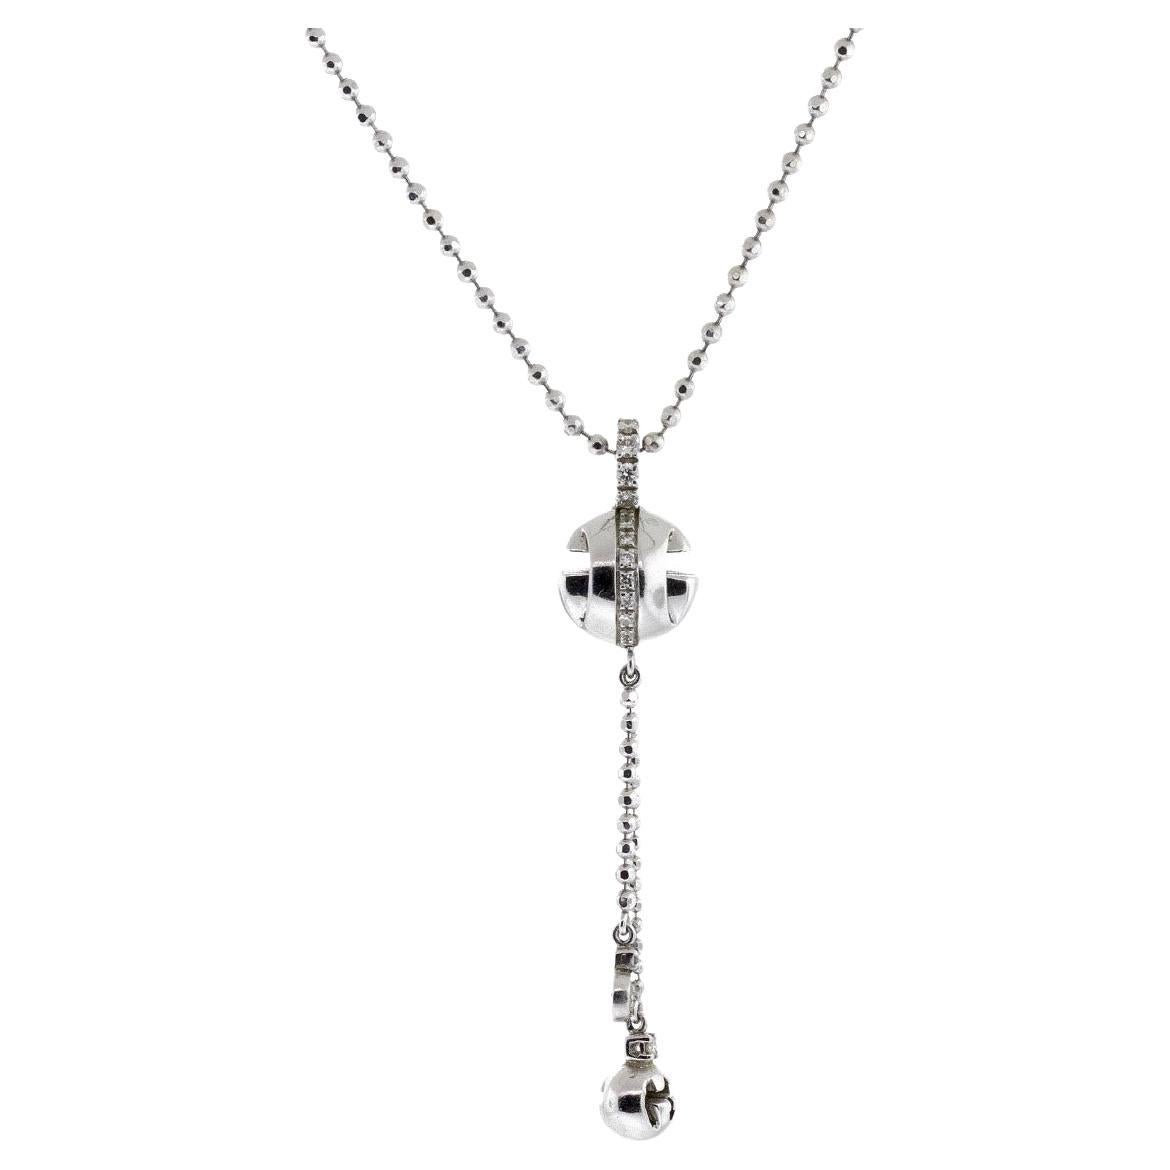 Gucci 18k White Gold "G" Ball Drop Diamond Necklace For Sale